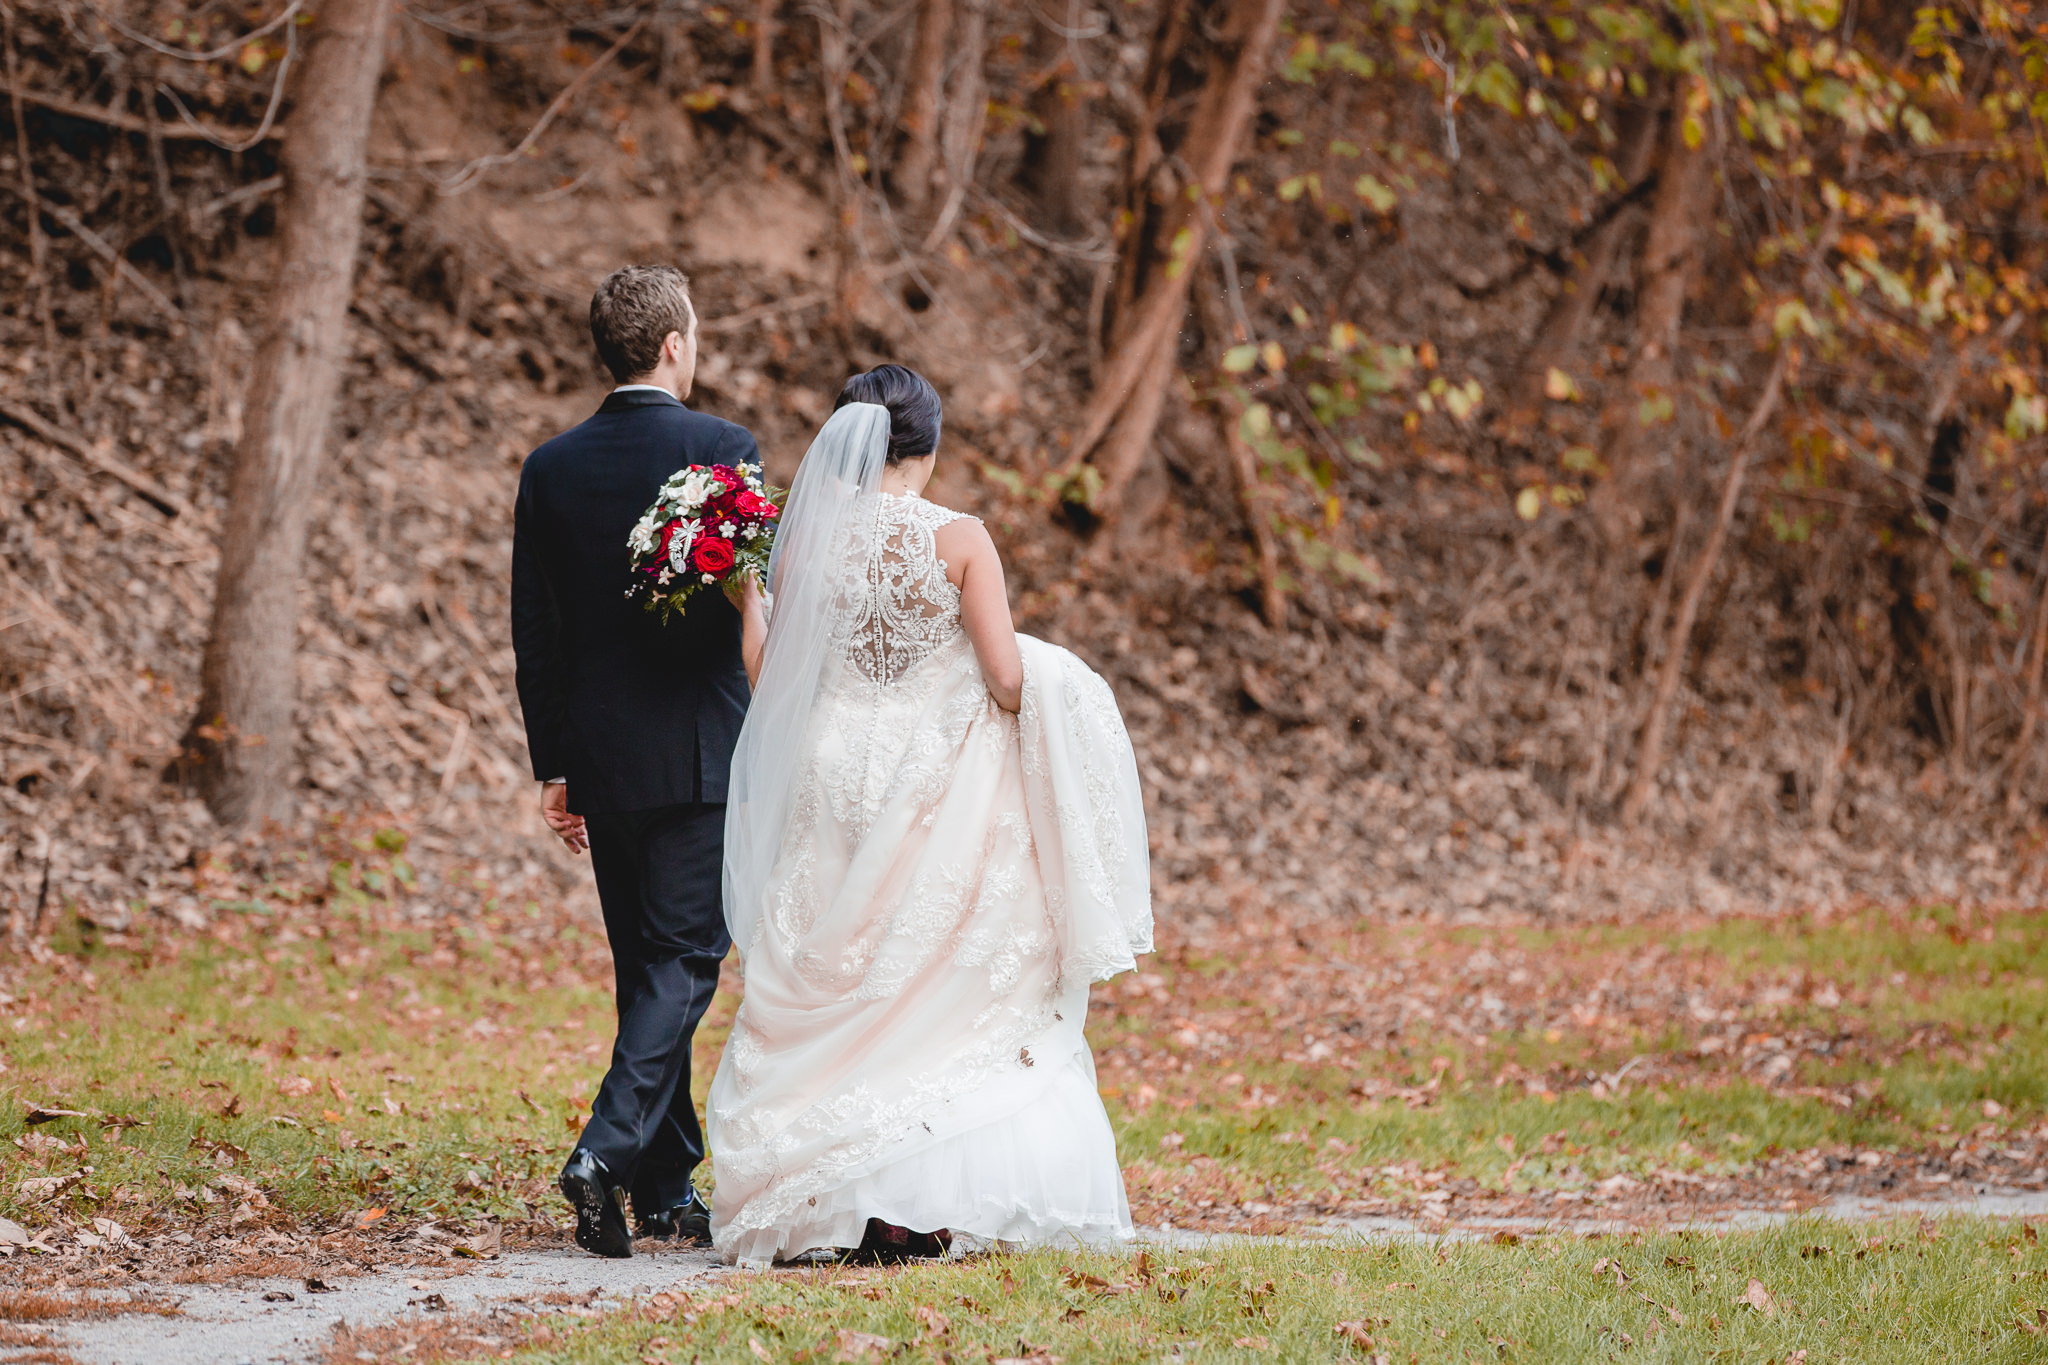 Newlyweds walk down a path in the park before their DoubleTree Pittsburgh Airport wedding reception